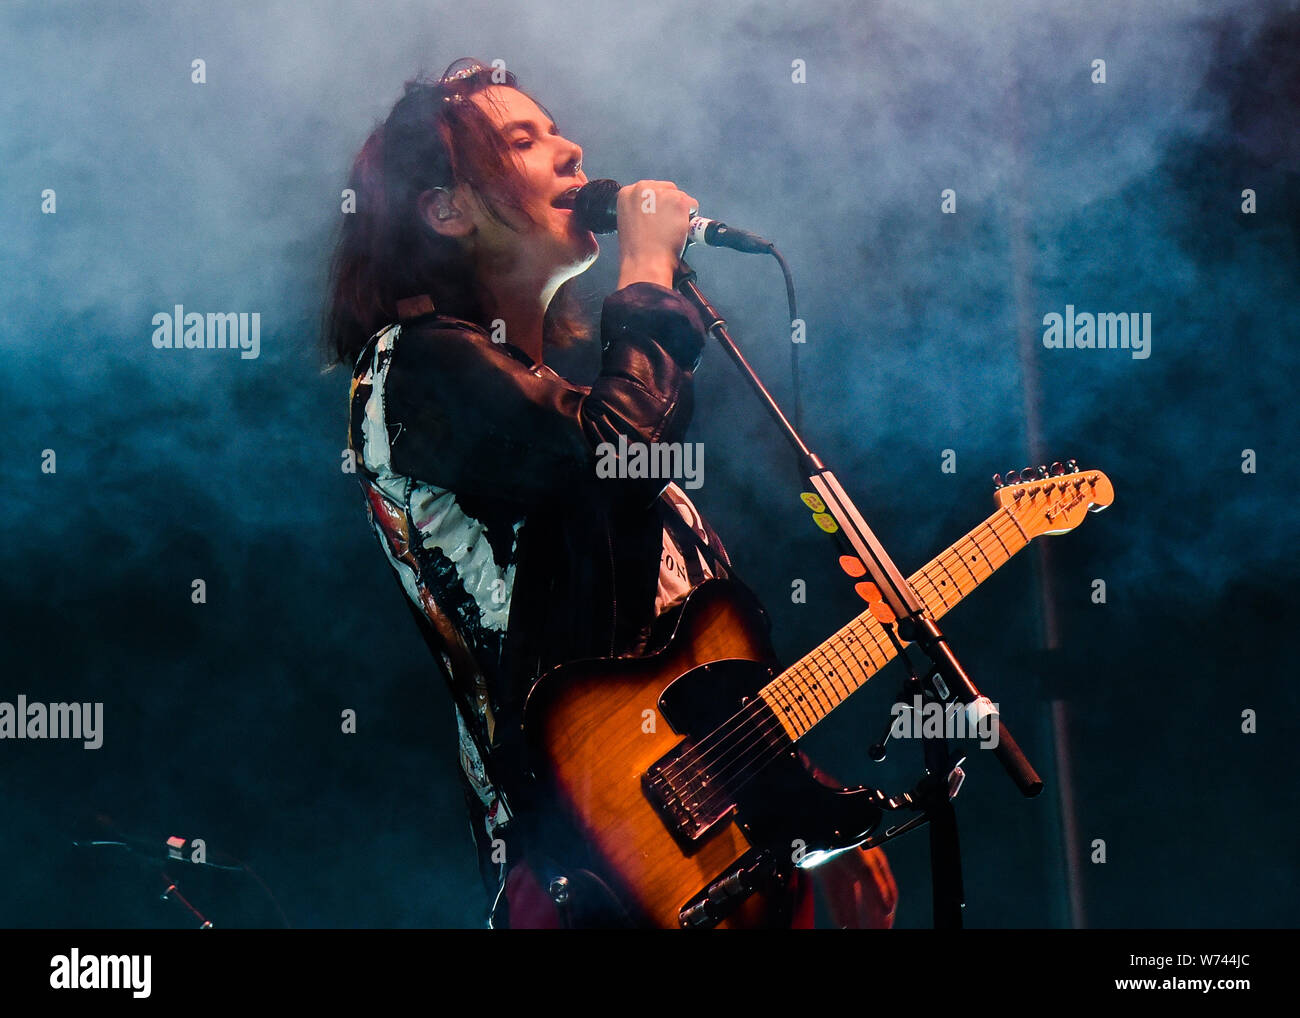 Long Beach, California, USA. 3rd Aug 2019. Nanna Bryndís Hilmarsdóttir of the band Of Monsters and Men performs at ALT 98.7 Summer Camp at the Queen Mary in Long Beach on August 3, 2019. Credit: The Photo Access/Alamy Live News Stock Photo